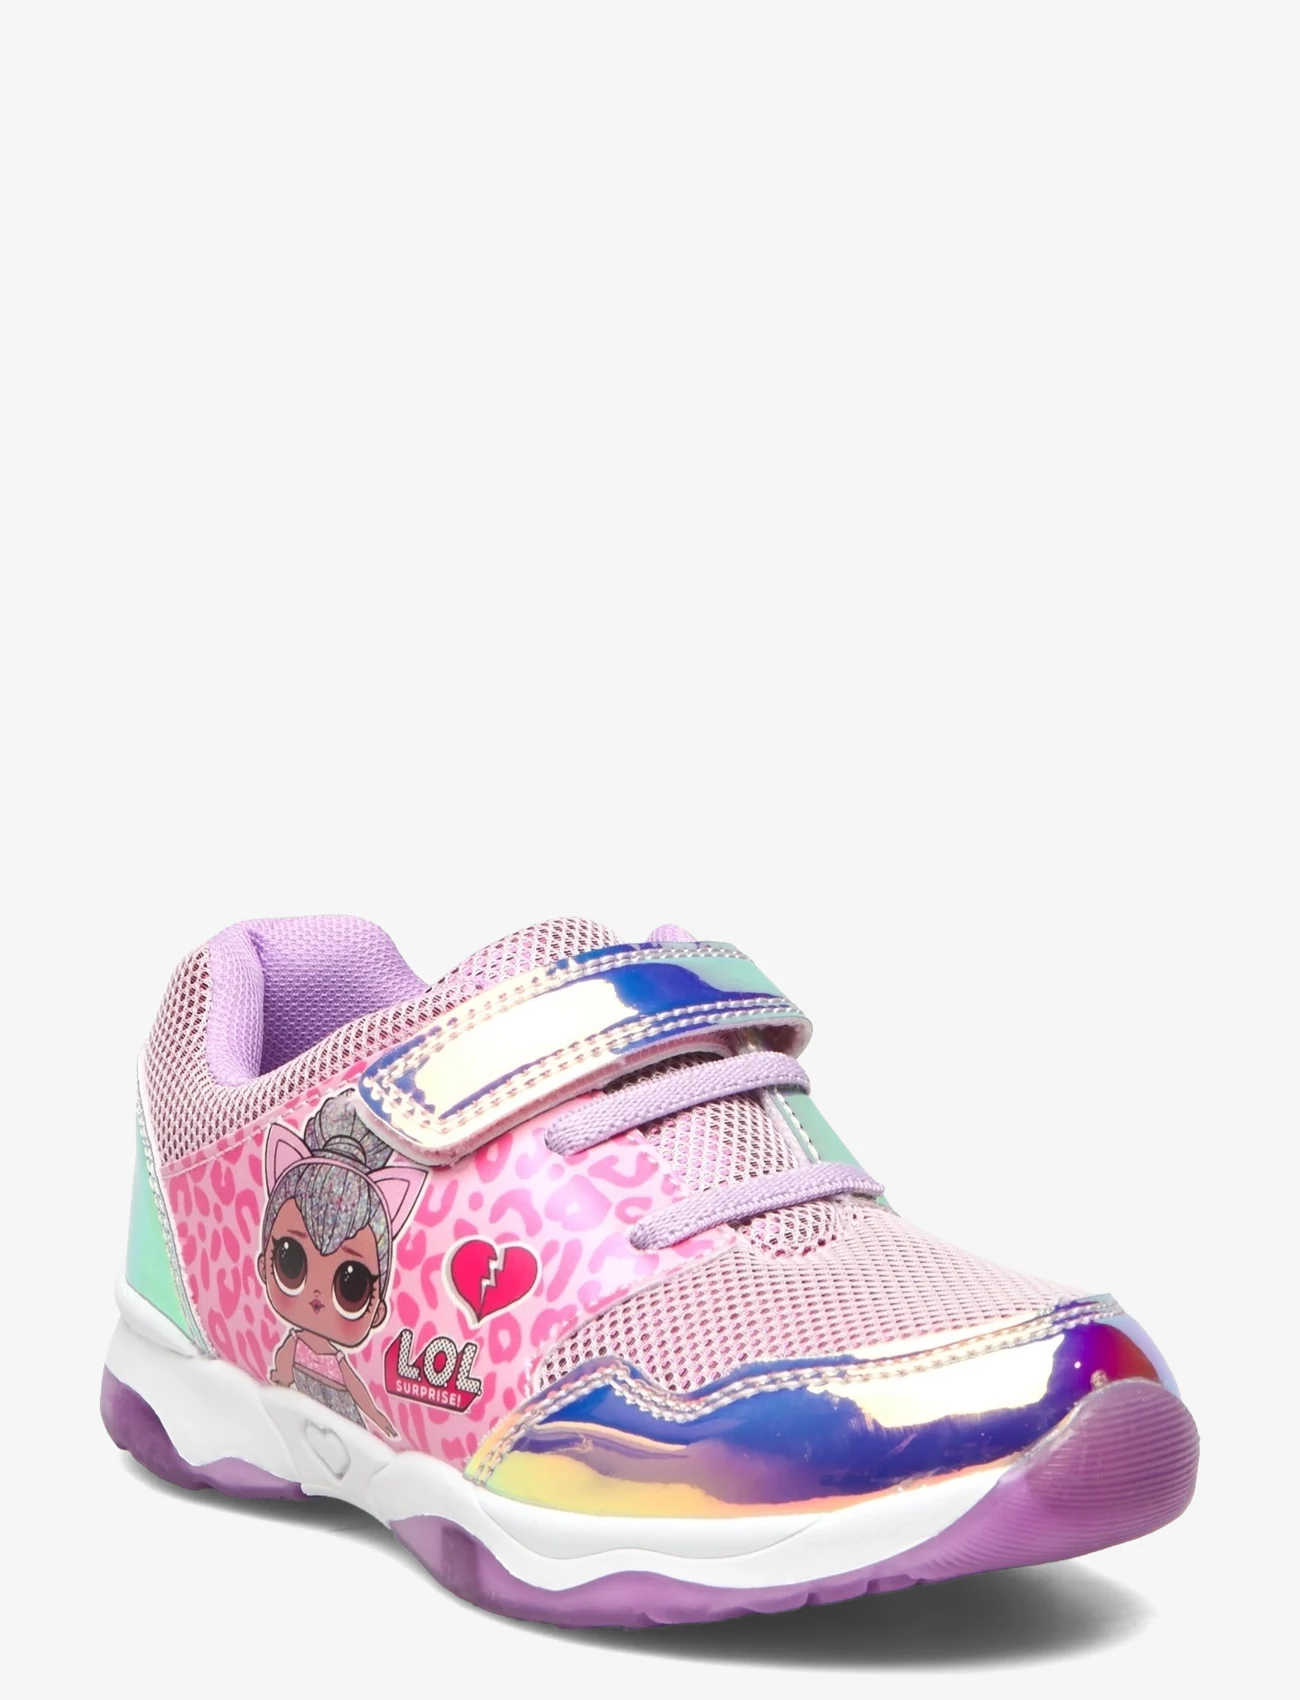 Leomil - Girls sneakers - sommerkupp - pink/lilac - 0